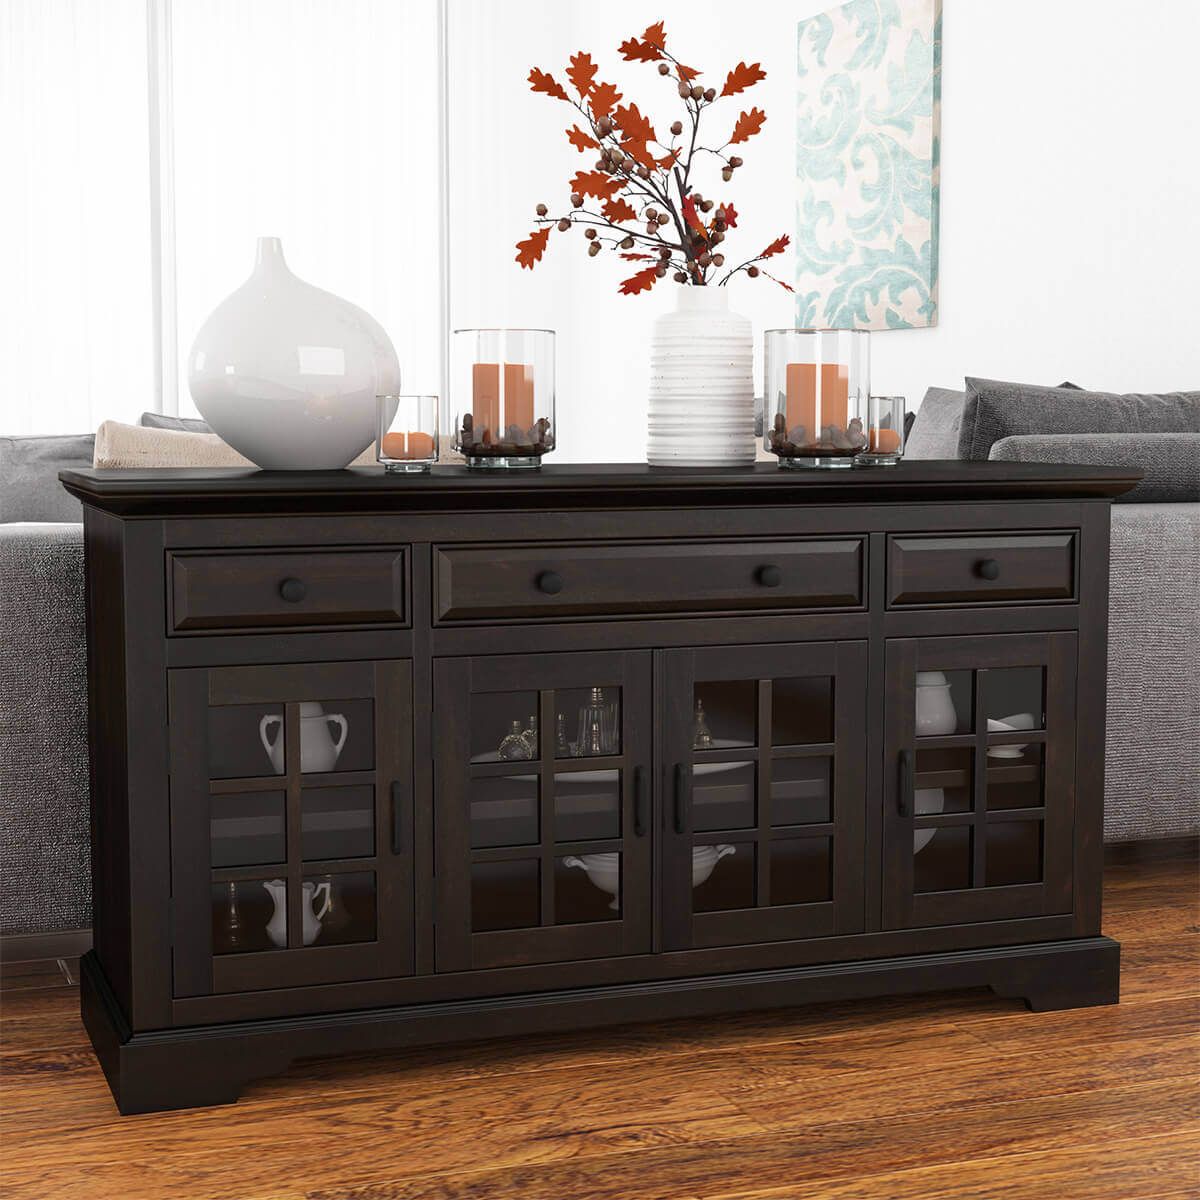 Tirana Rustic Solid Wood Glass Door 3 Drawer Large Sideboard Cabinet For Current 3 Drawer Sideboards (View 4 of 15)